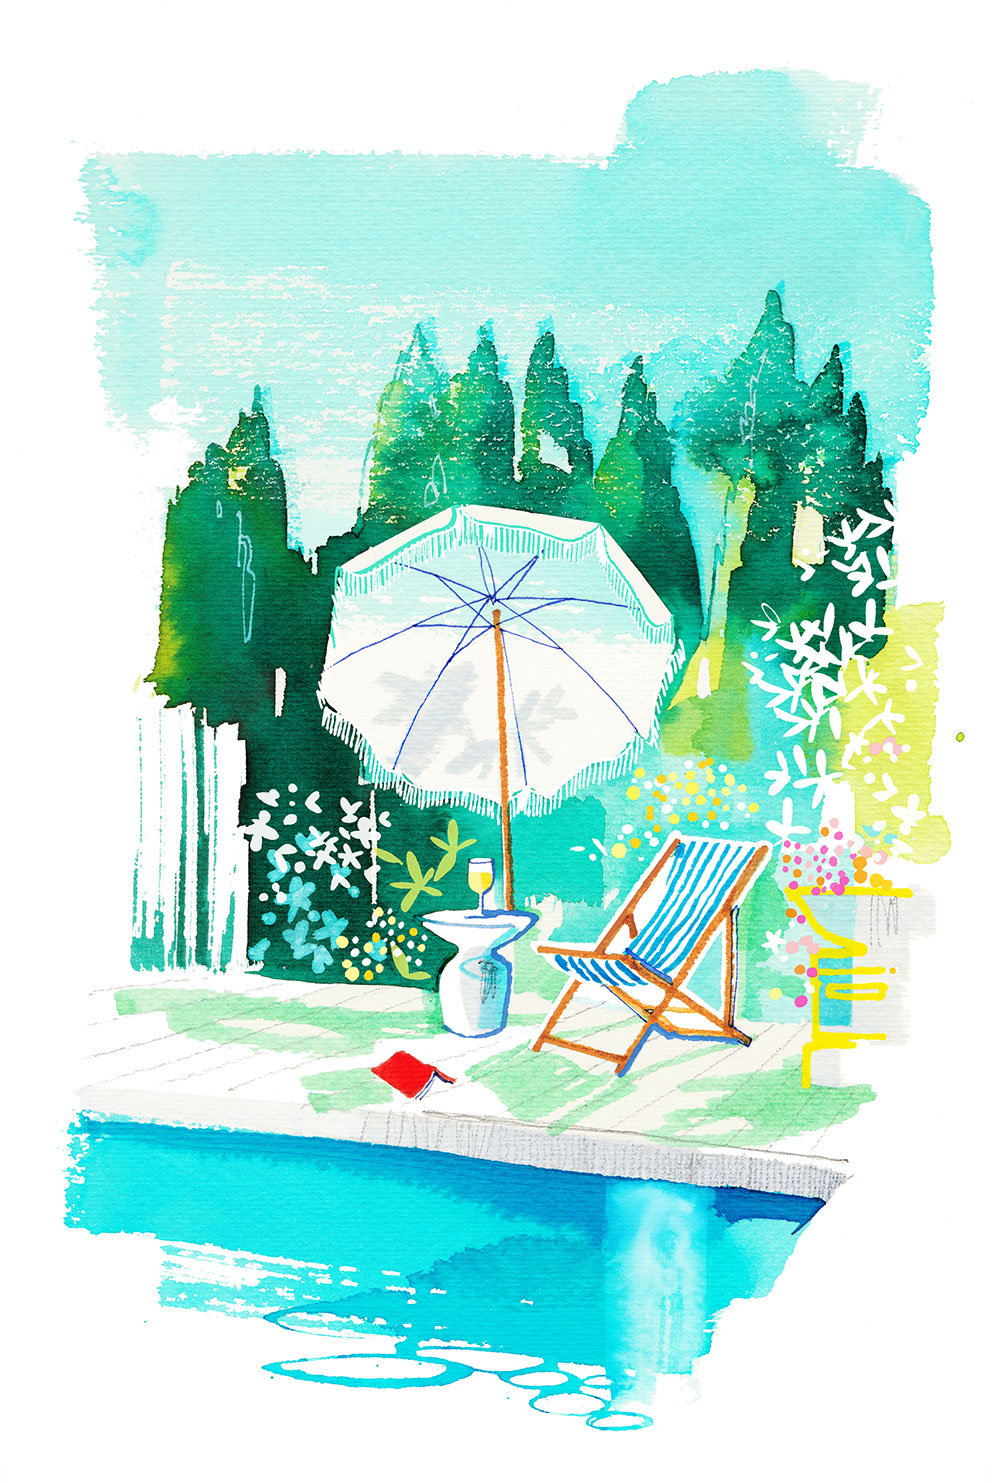 Summer Relax, Watercolor Illustration of a Garden with Swimming Pool